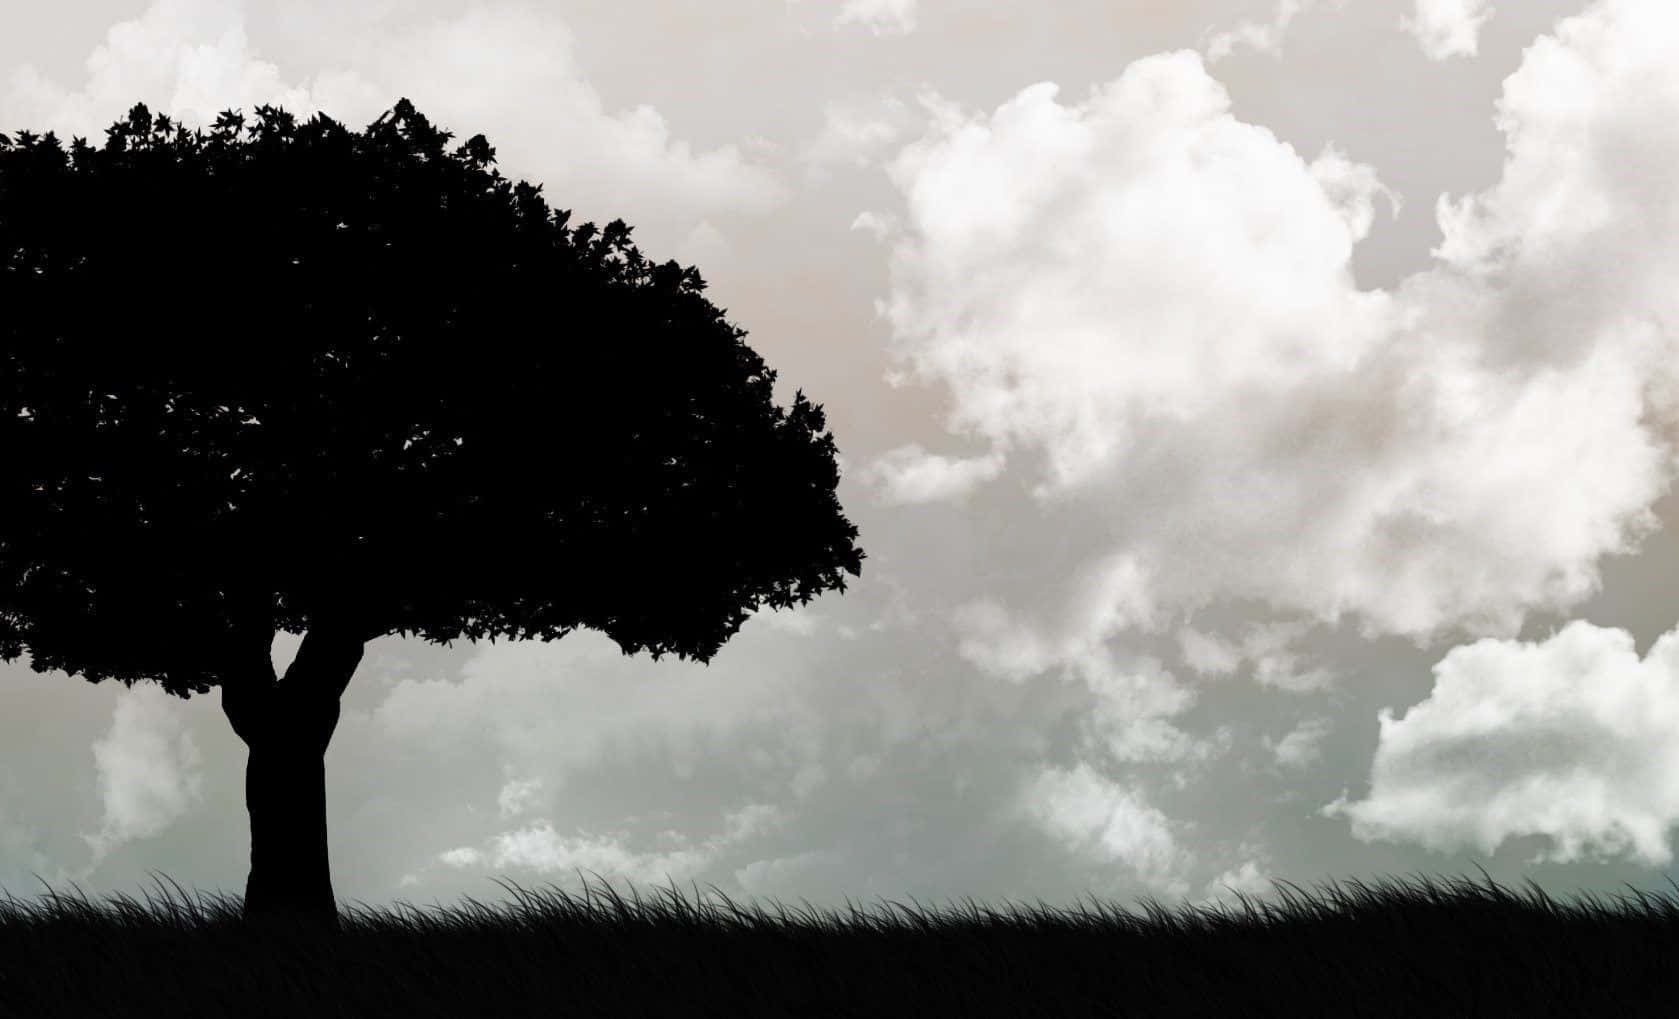 A Stunning Black and White Tree Silhouette Against a Cloudy Sky Wallpaper